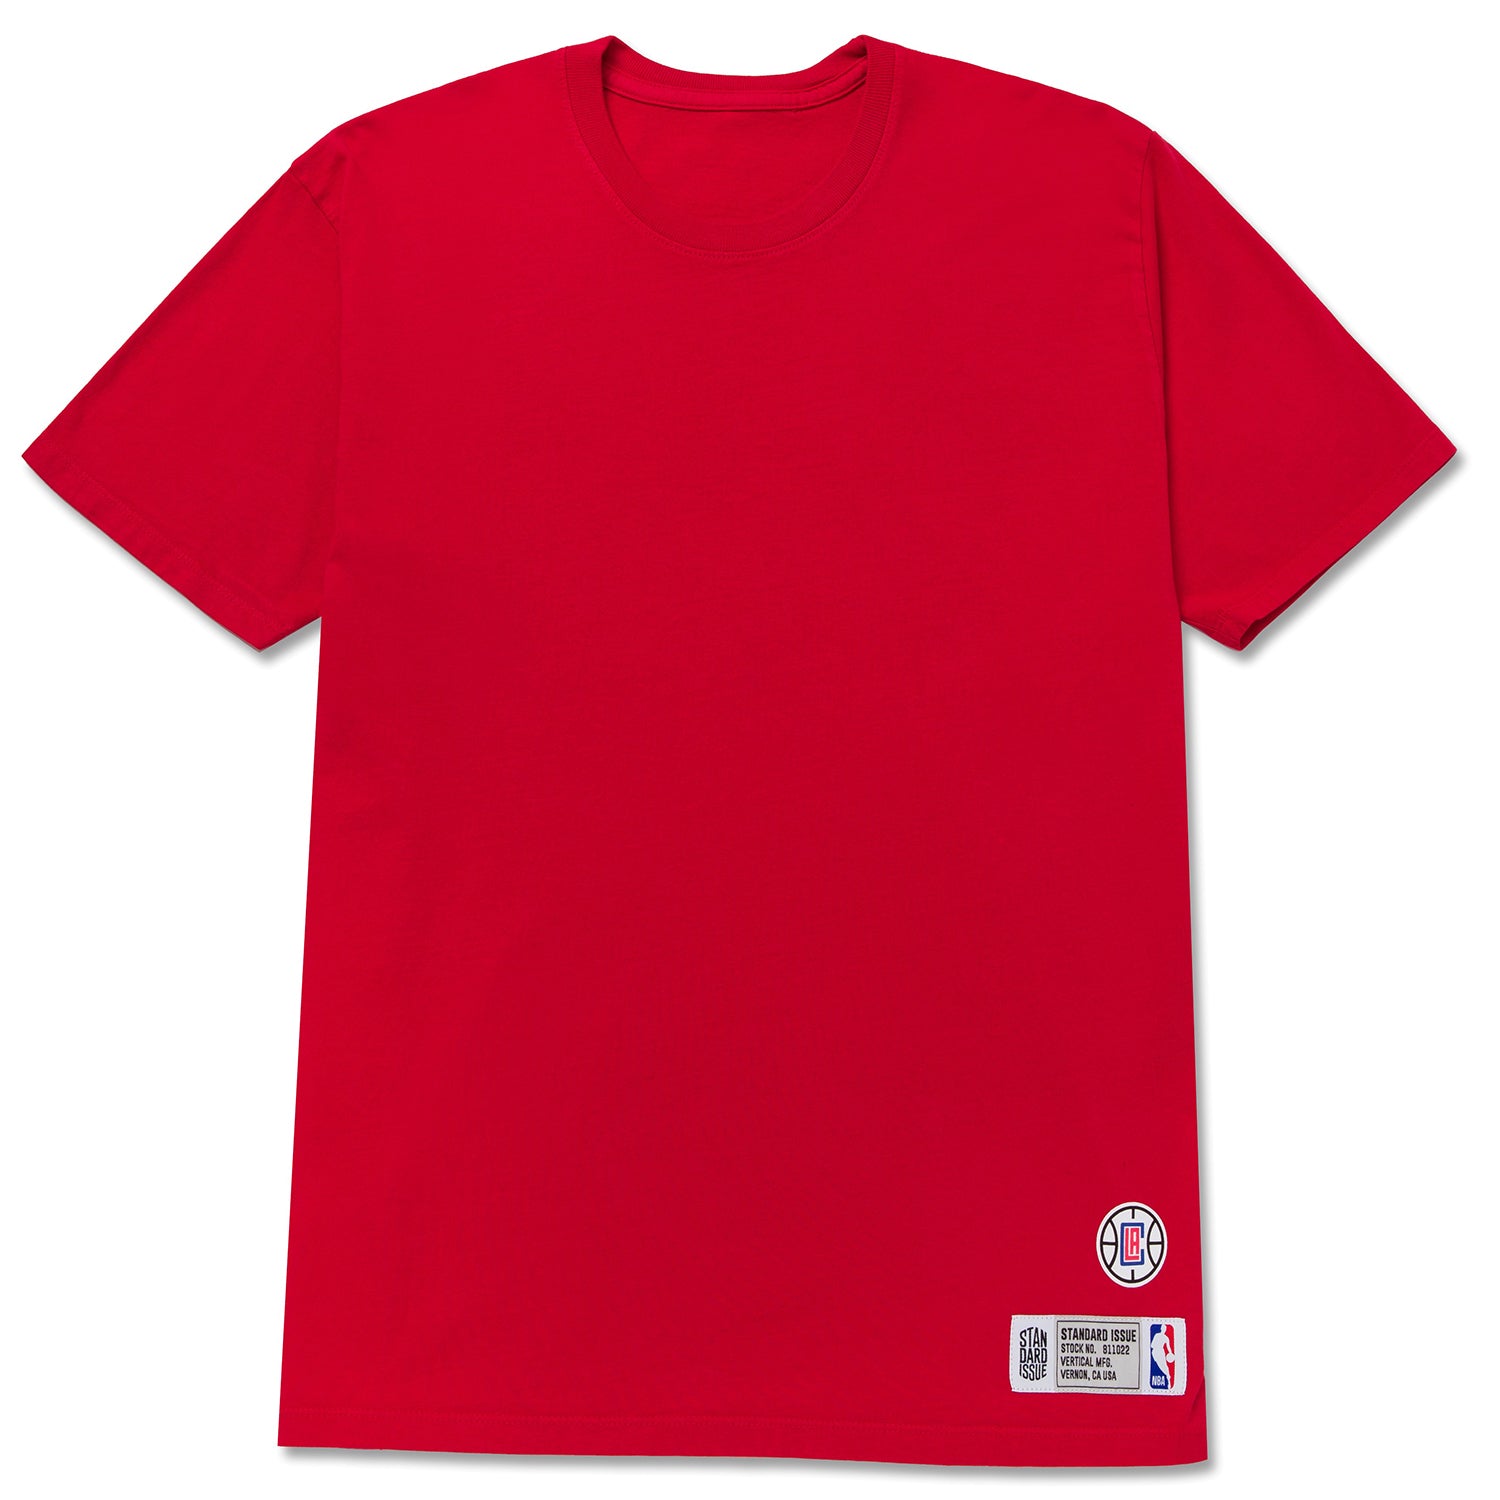 LA Clippers 3-Pack Short Sleeve Tee by Standard Issue | Clippers Fan Shop